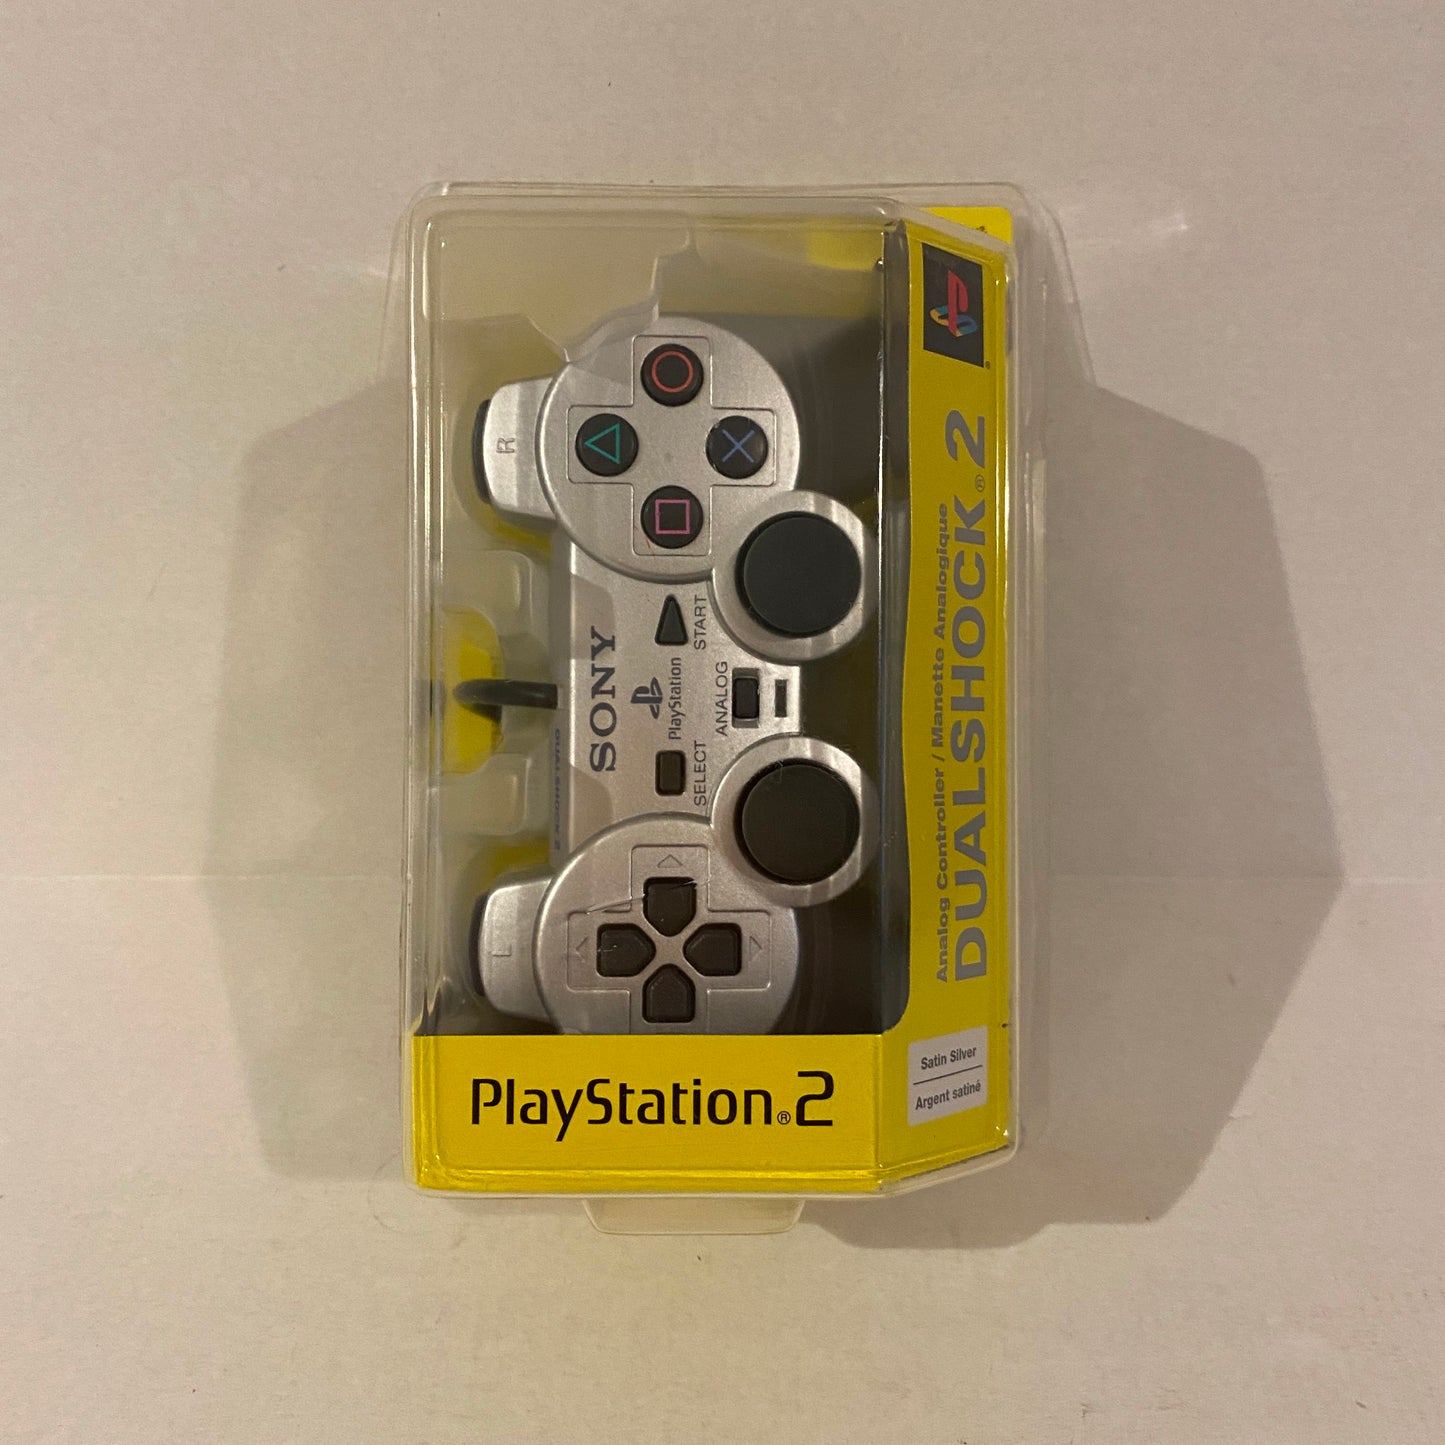 New Sony Playstation Dualshock 2 Analog Controller - Satin Silver